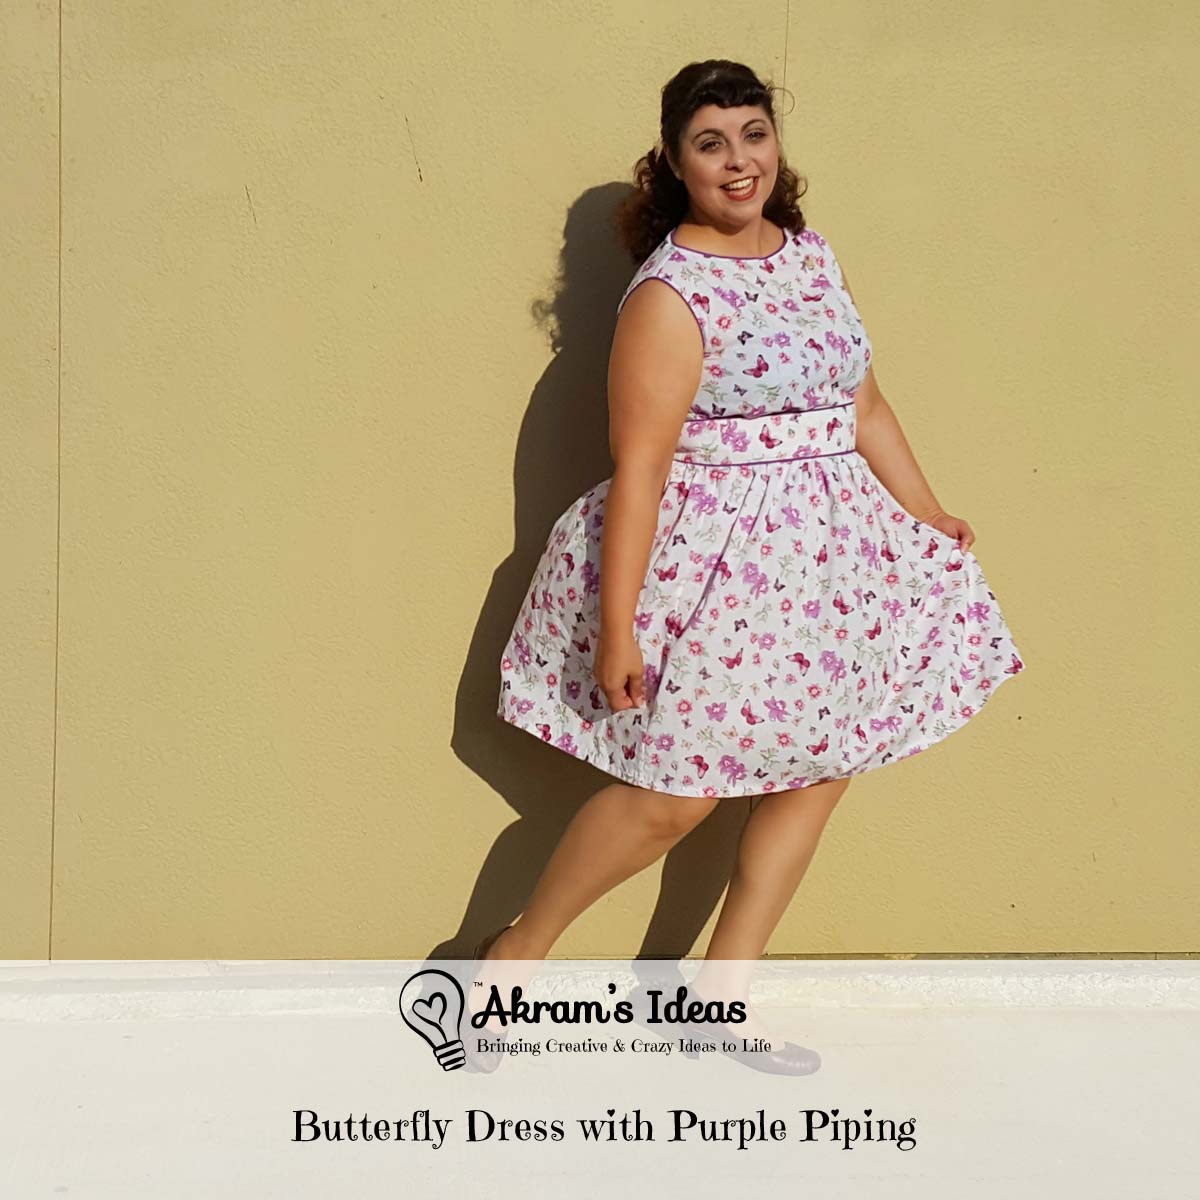 Butterfly dress with purple piping made from vintage 1960s reproduction Simplicity 1364 blouse and gathered skirt in a cotton butterfly print.